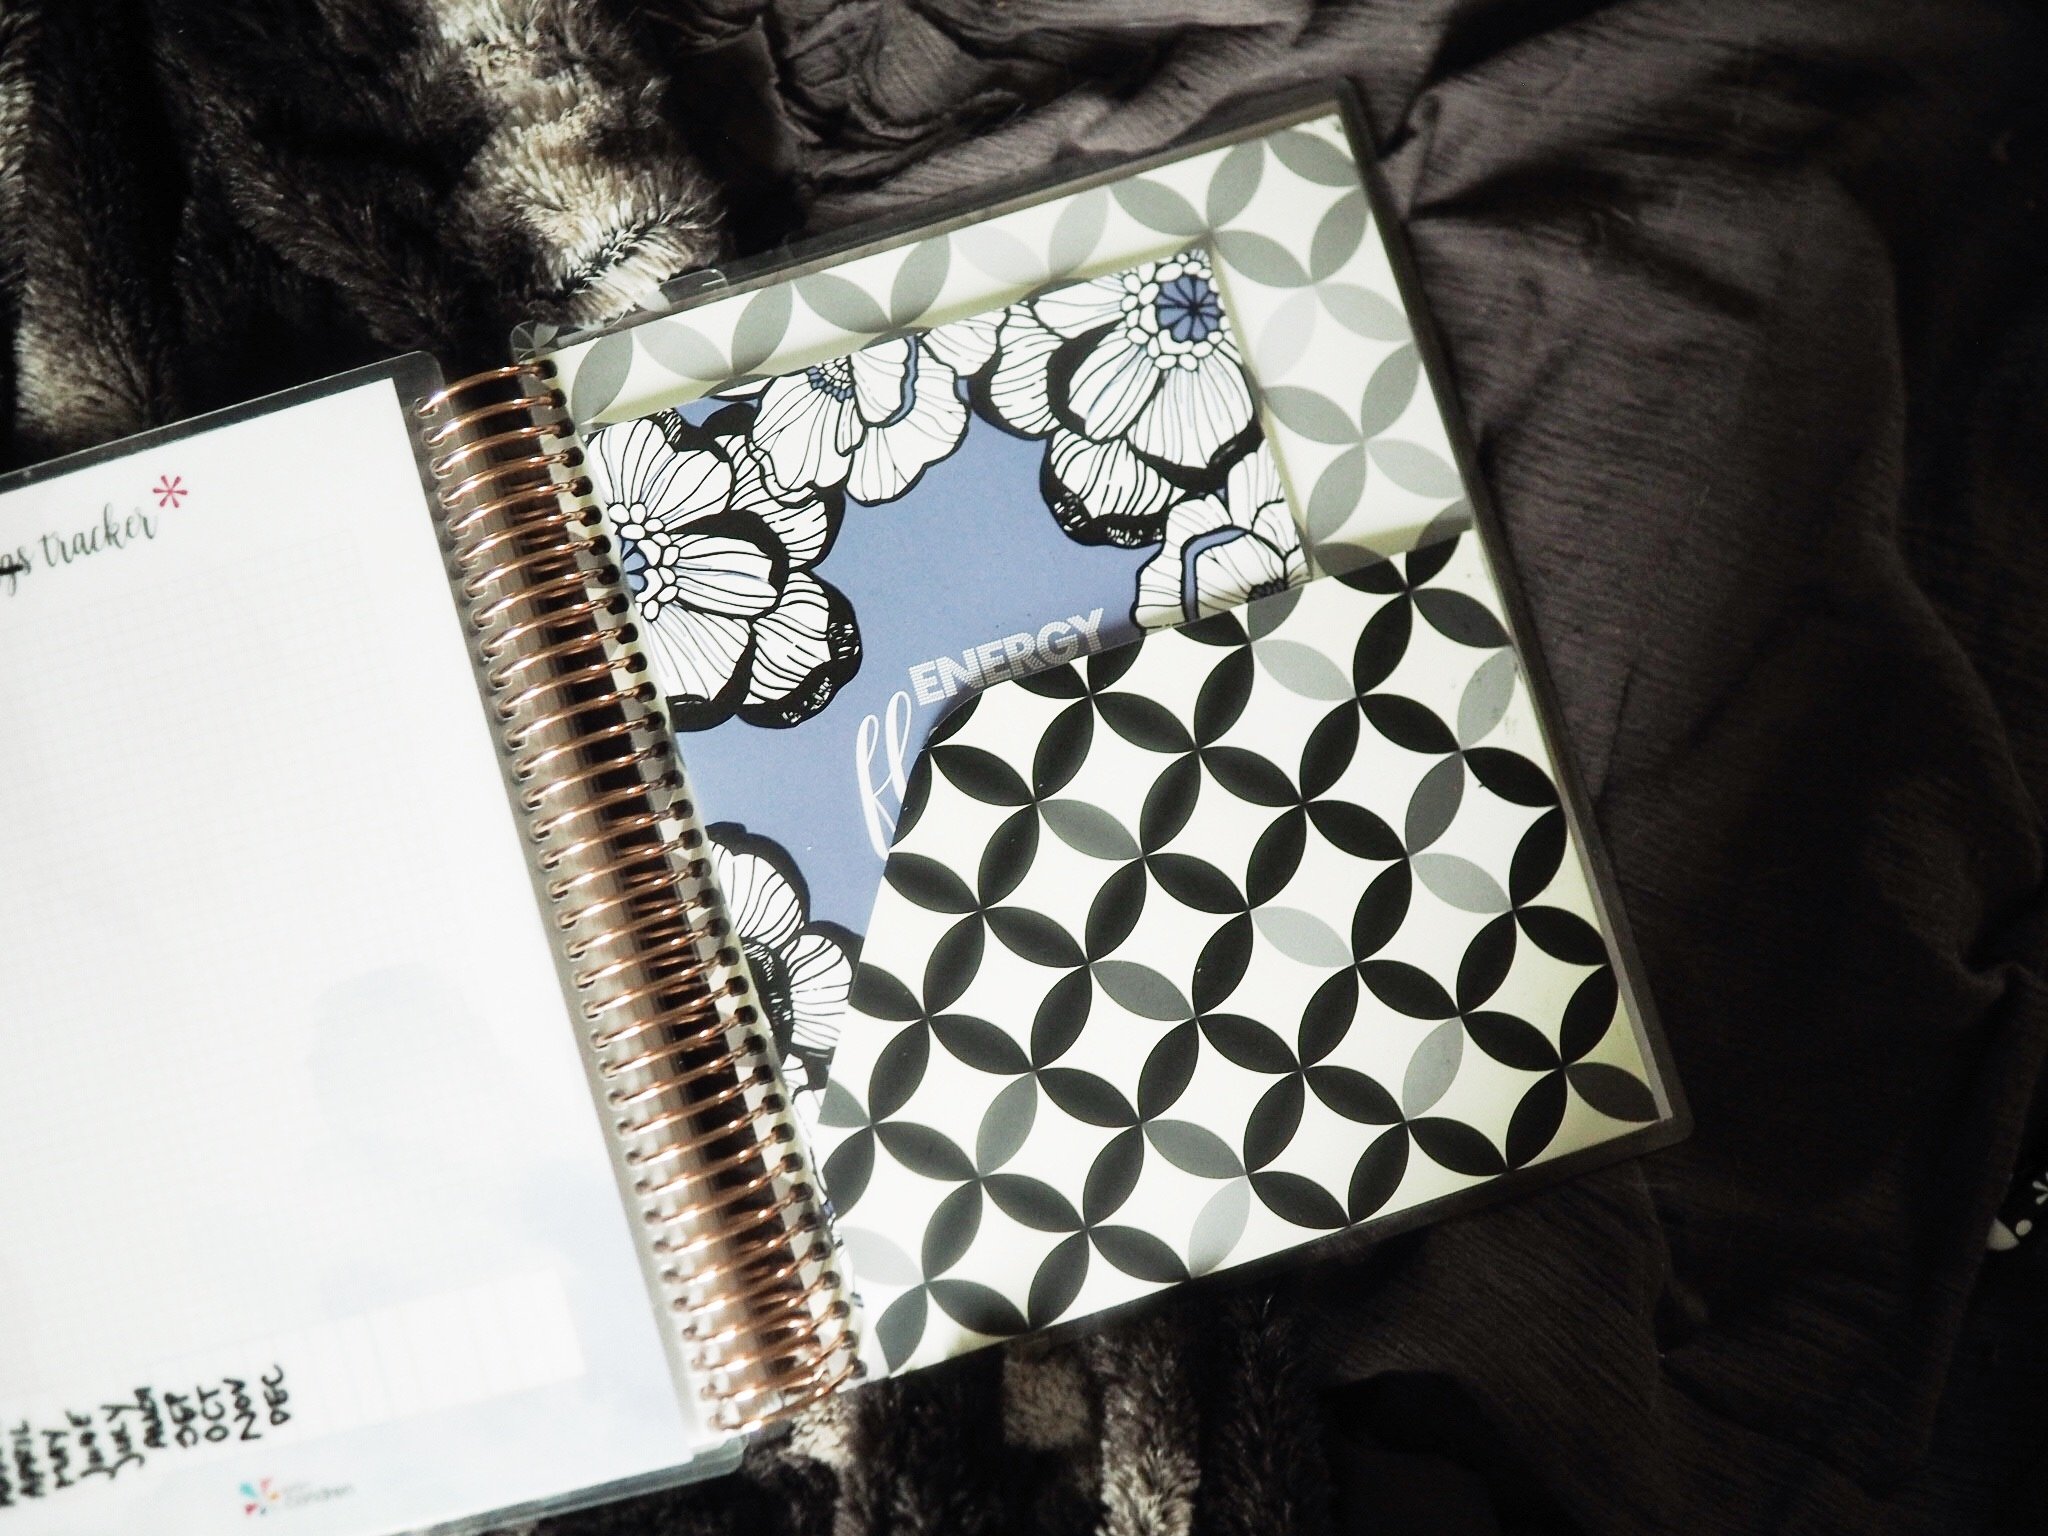 Use the Erin Condren Planner to organize your life!